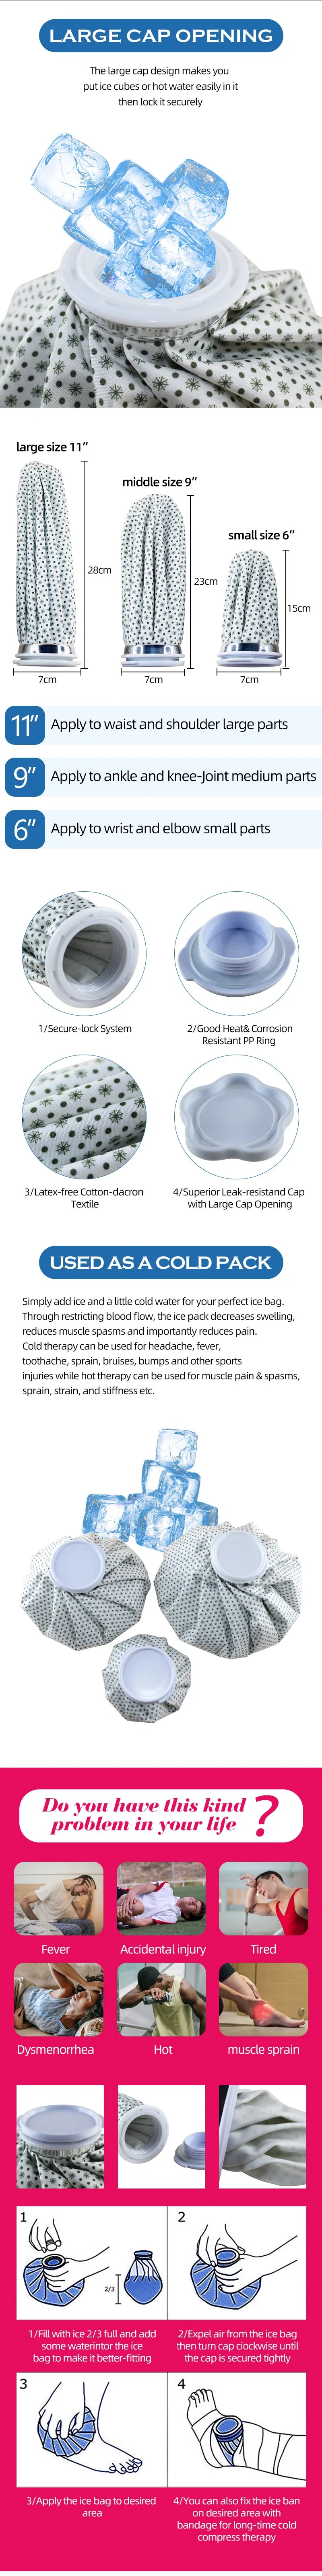 Health Care Product Cold Pack Postpartum Pain Relief After Sports for Men Women Summer Use